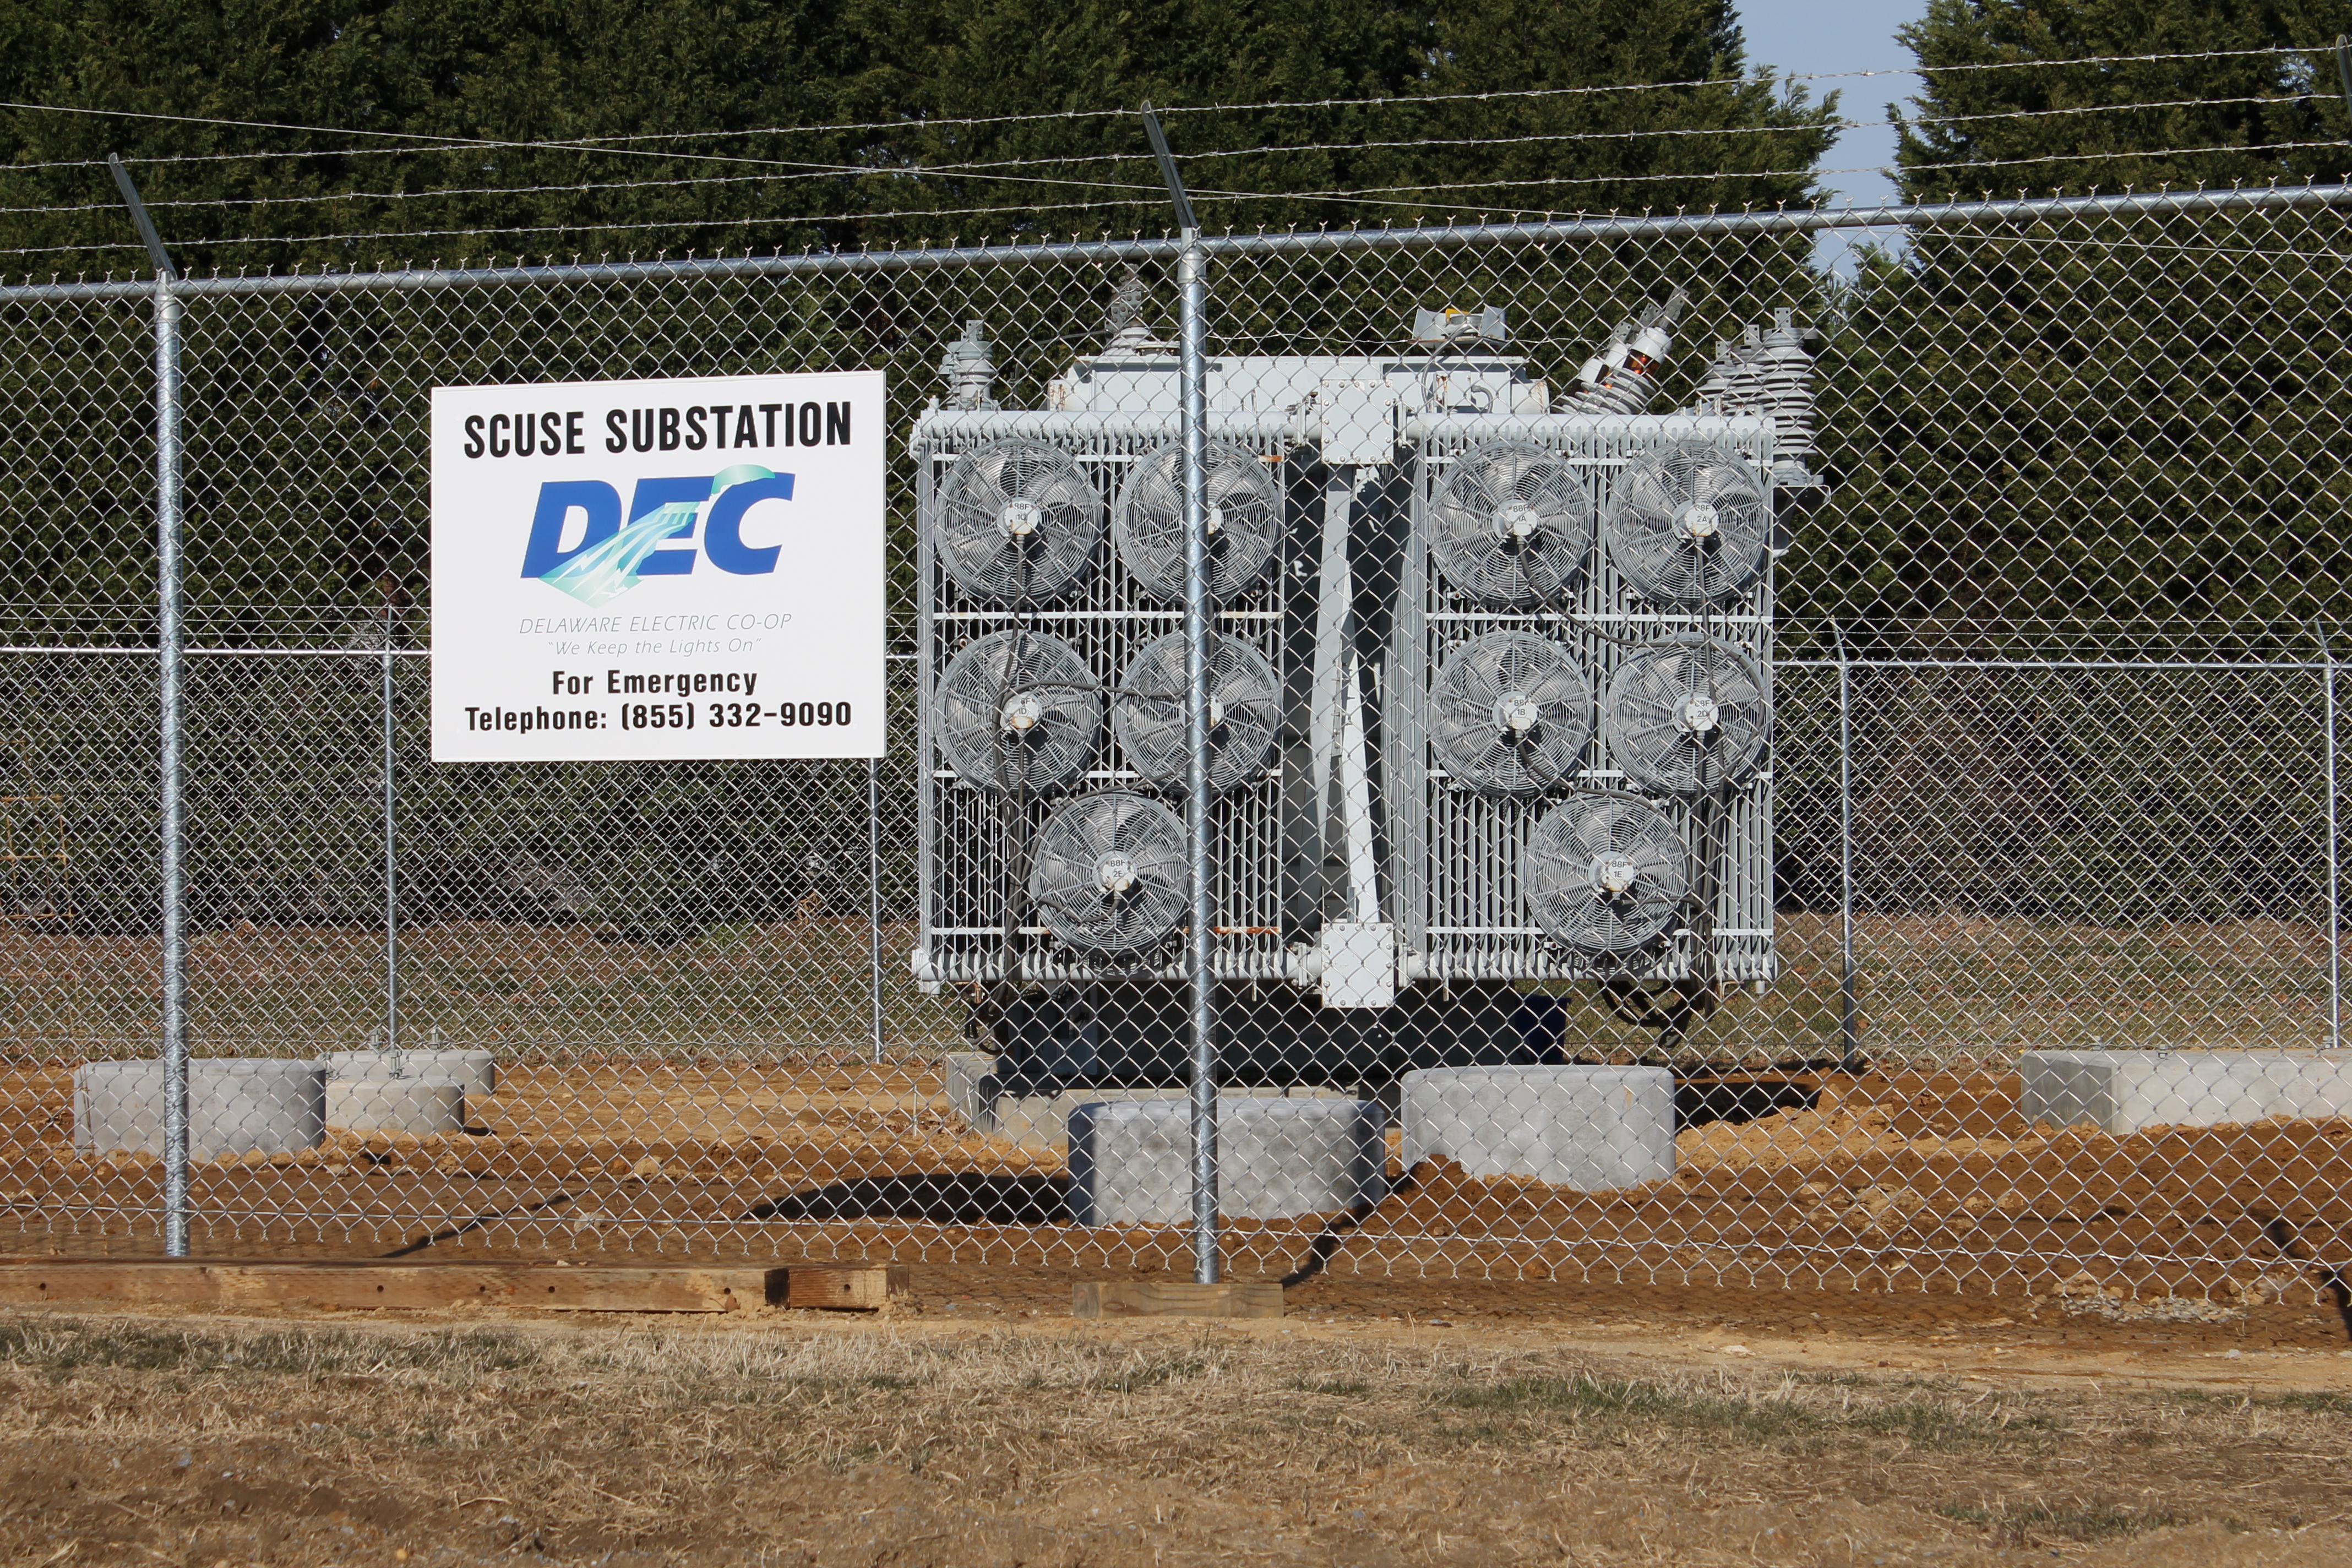 DEC's Scuse substation helps provide power to the businesses and homes in the communities we serve.